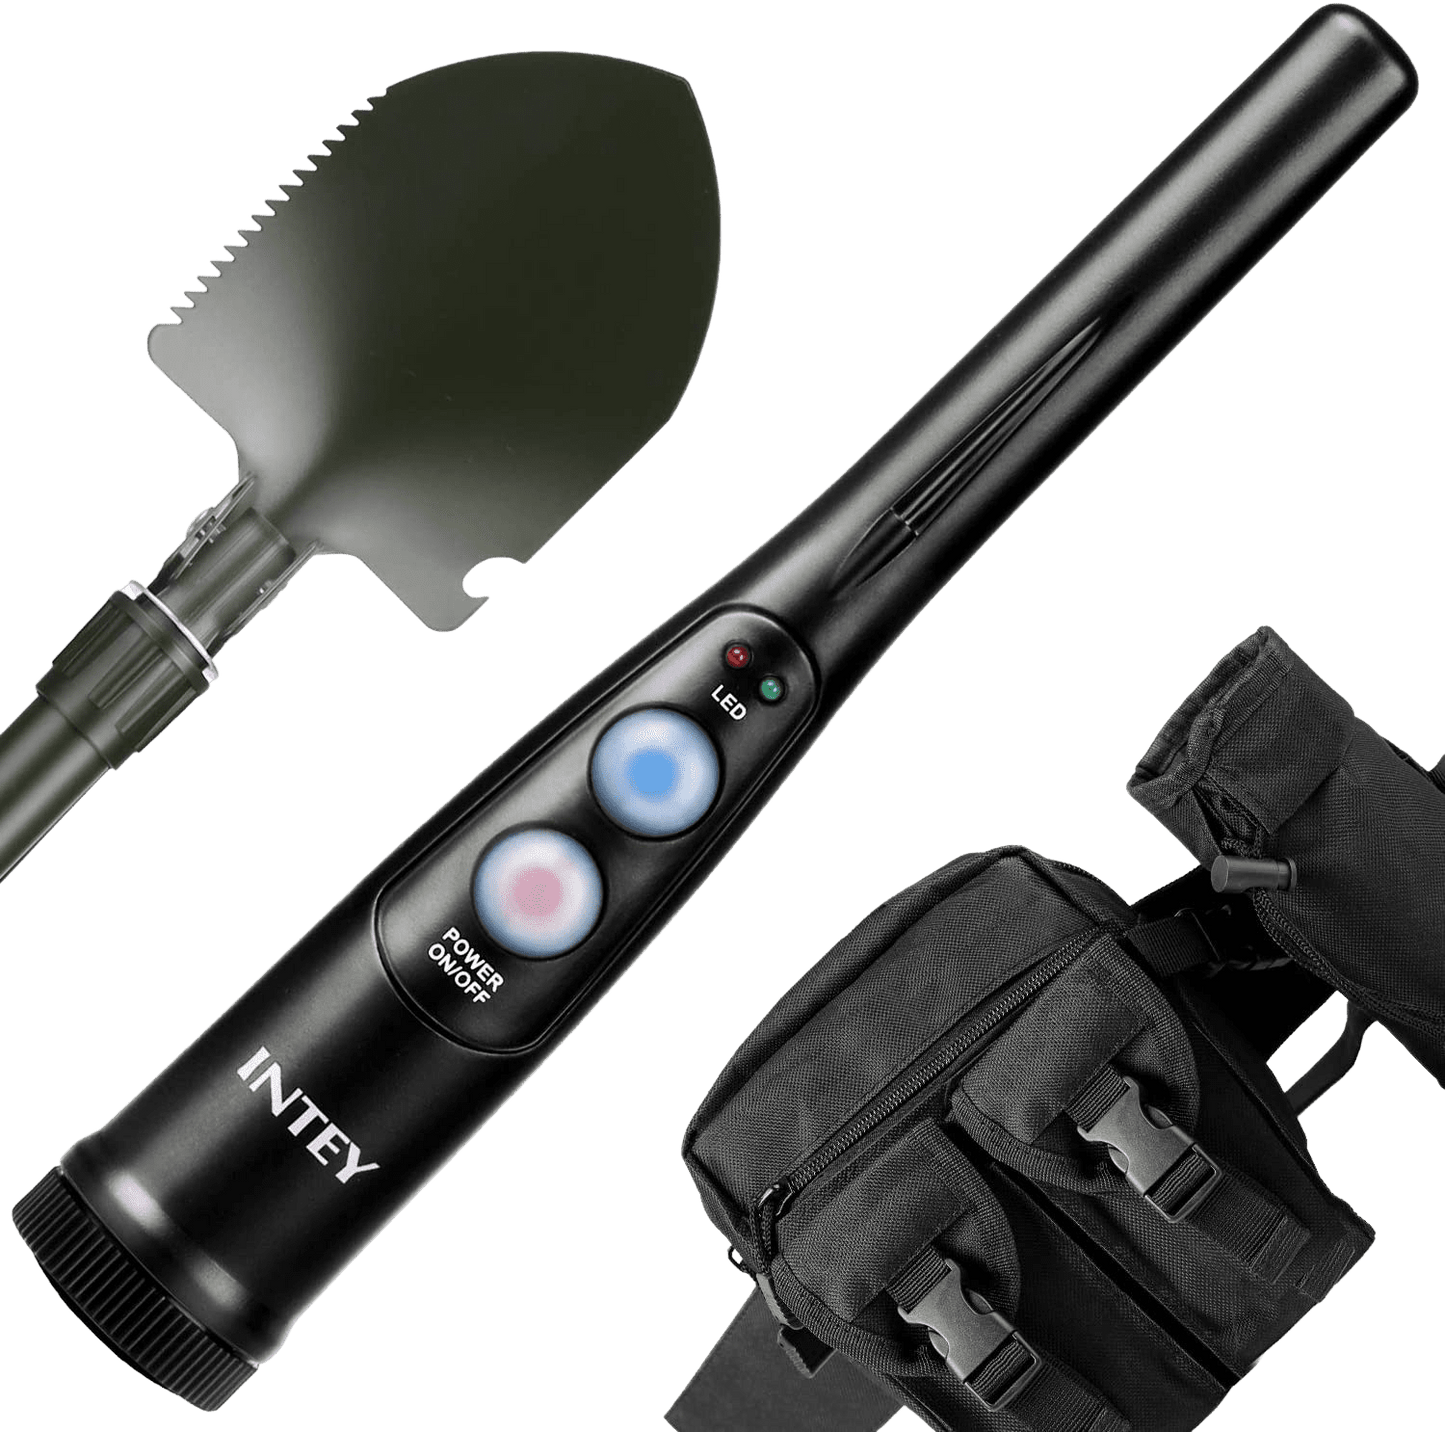 INTEY Customized Metal Detector Pinpointer Kit-360°Scanning,IP66 Water Resistant,3-LED Detection Display&amp;Vibration Response-Handheld Metal Detector with 3 Accessories(Belt Holster,Waist B - Home Decor Gifts and More